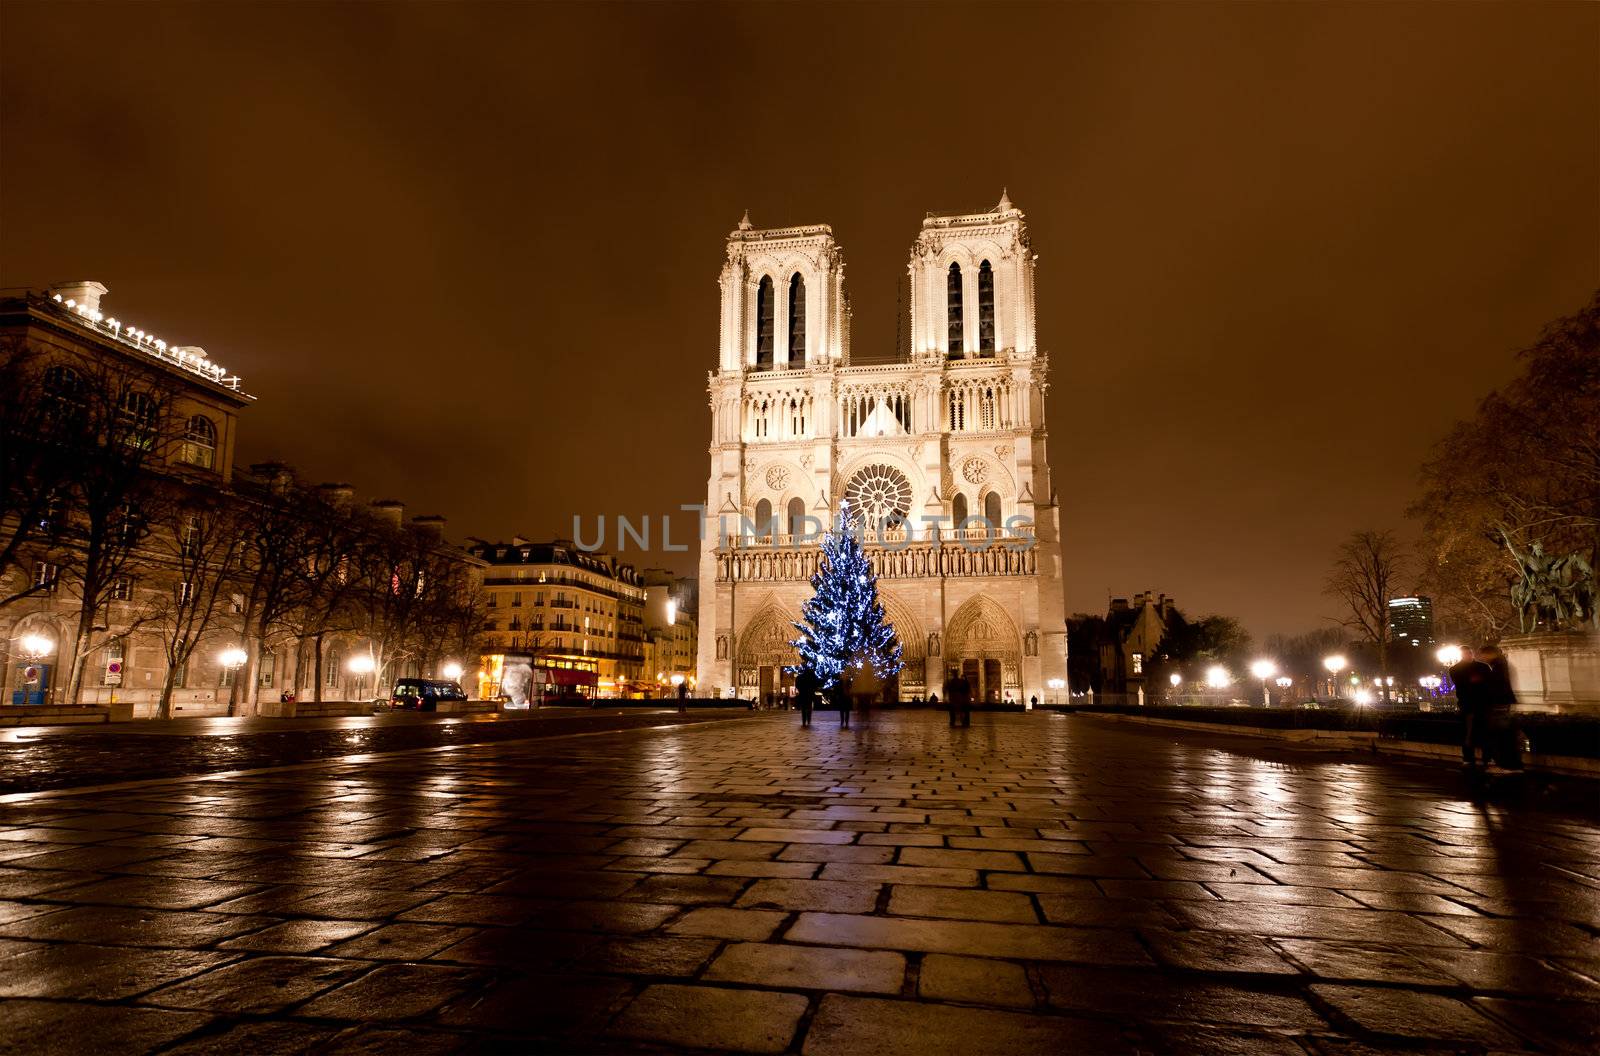 The famous Notre Dame at night in Paris by gary718